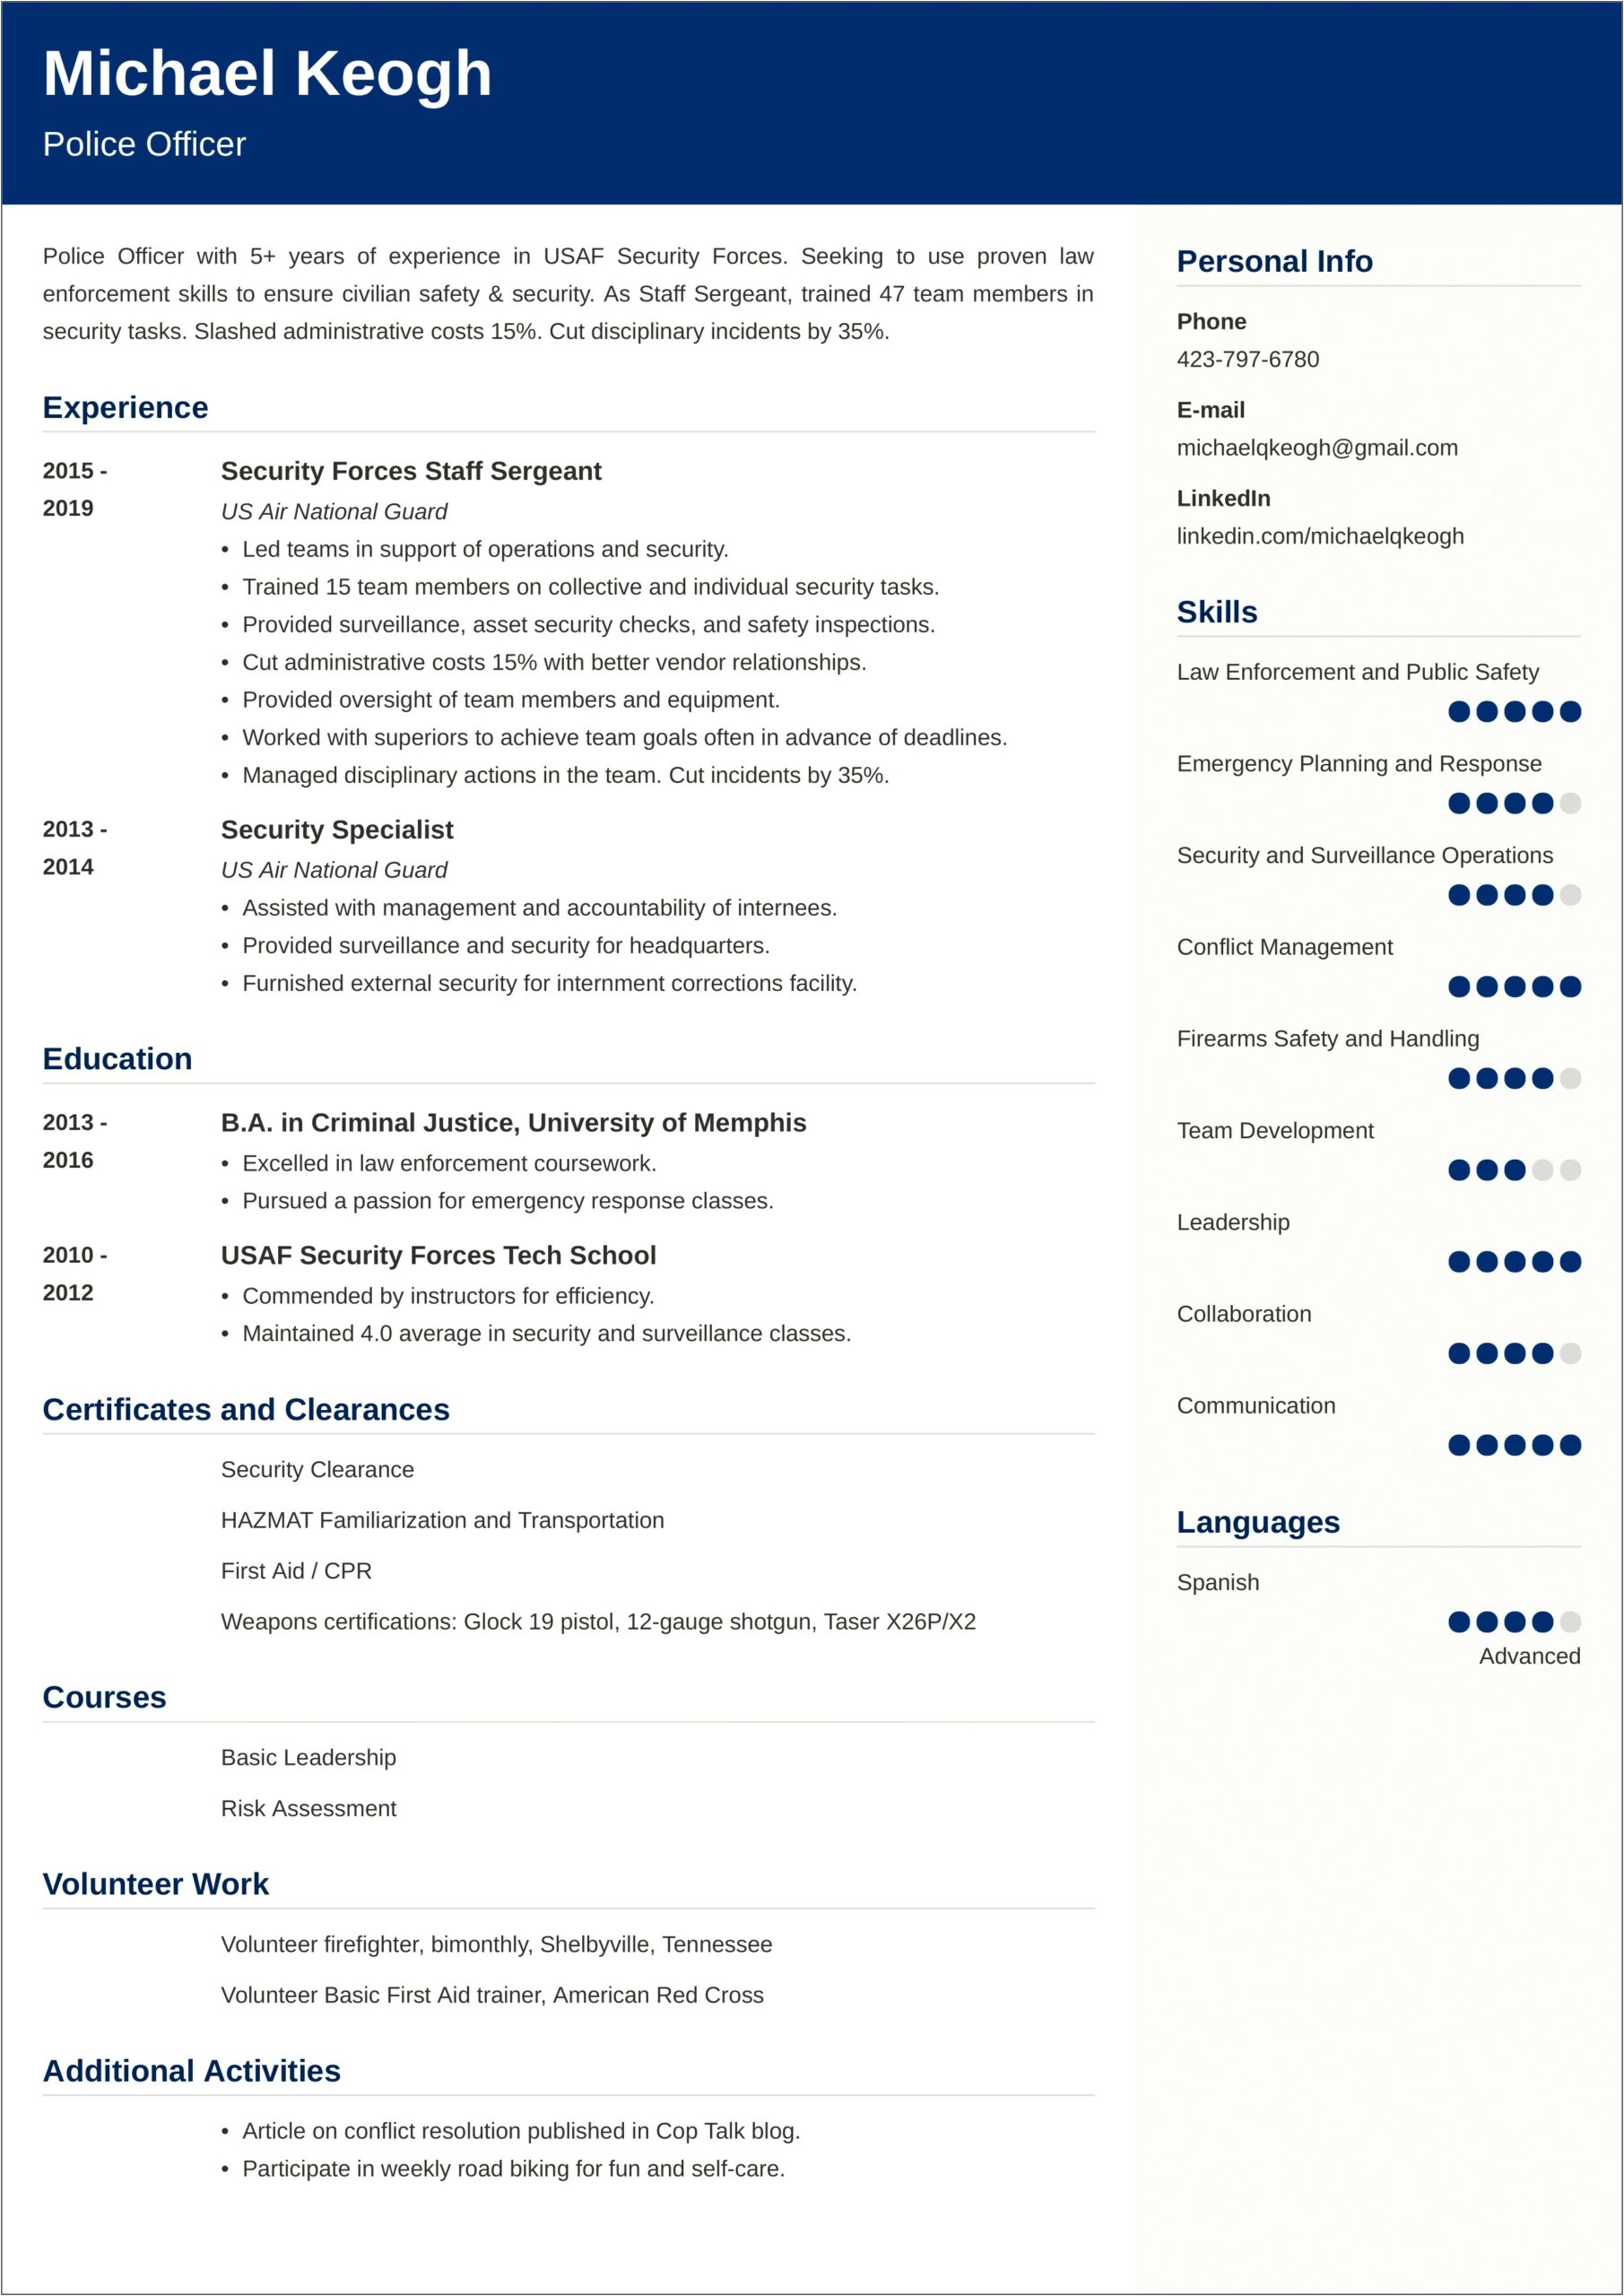 Sample Resume For A Site Inspector Training Instructor